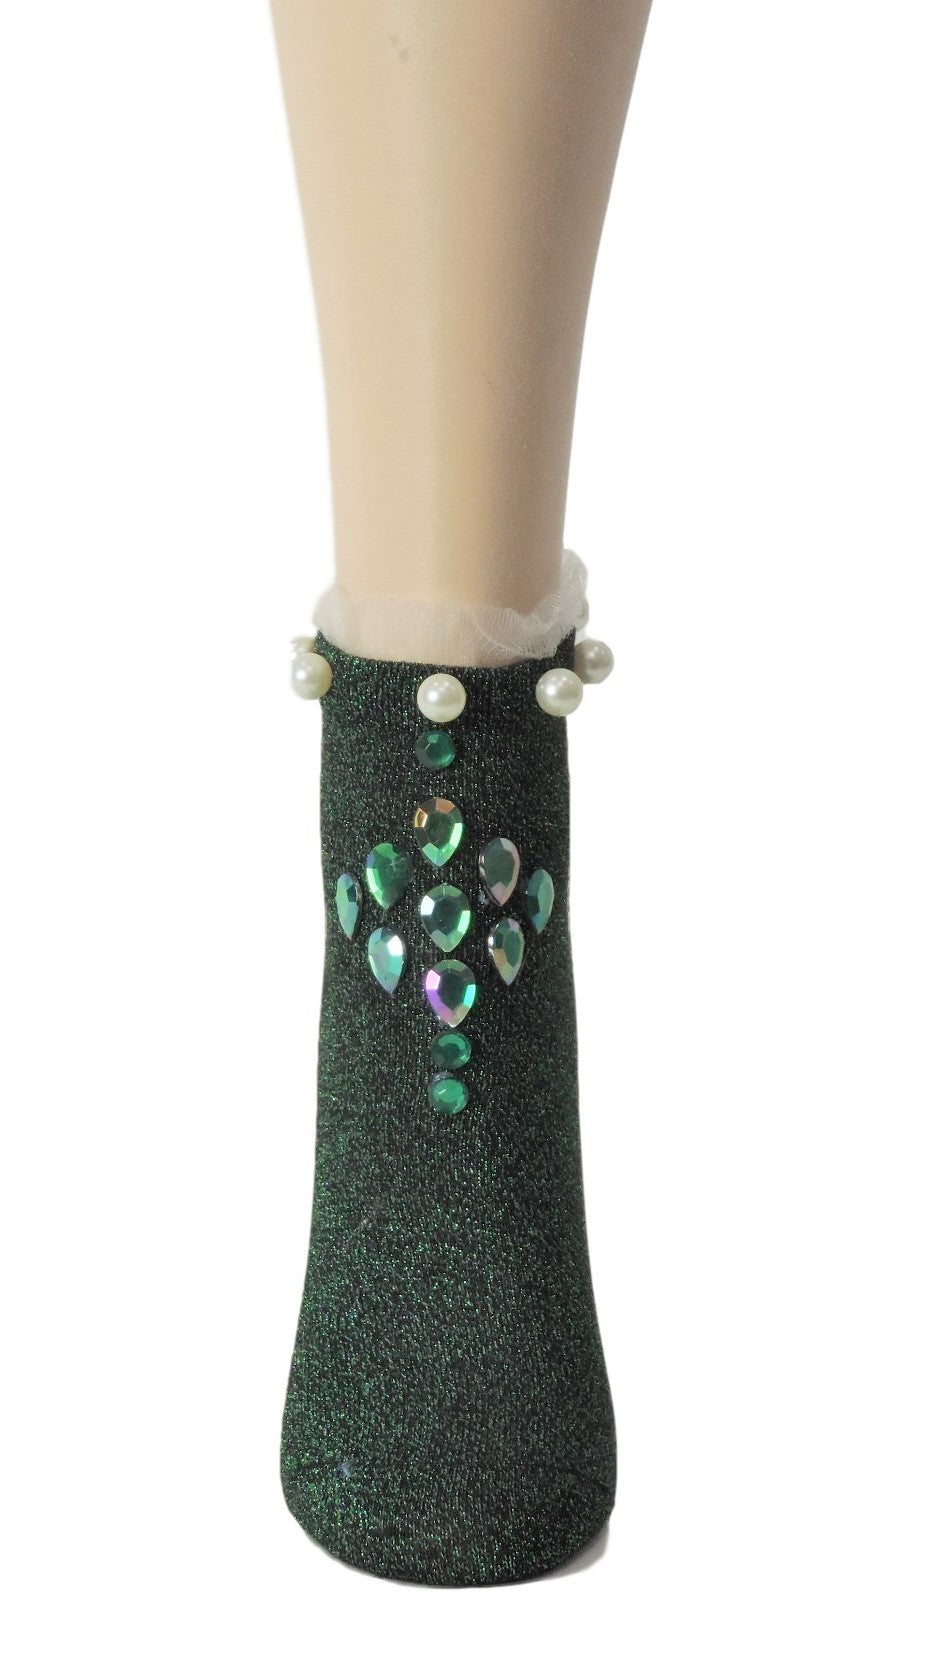 Stunning Green Custom Ankle Socks with crystals - Global Trendz Fashion®